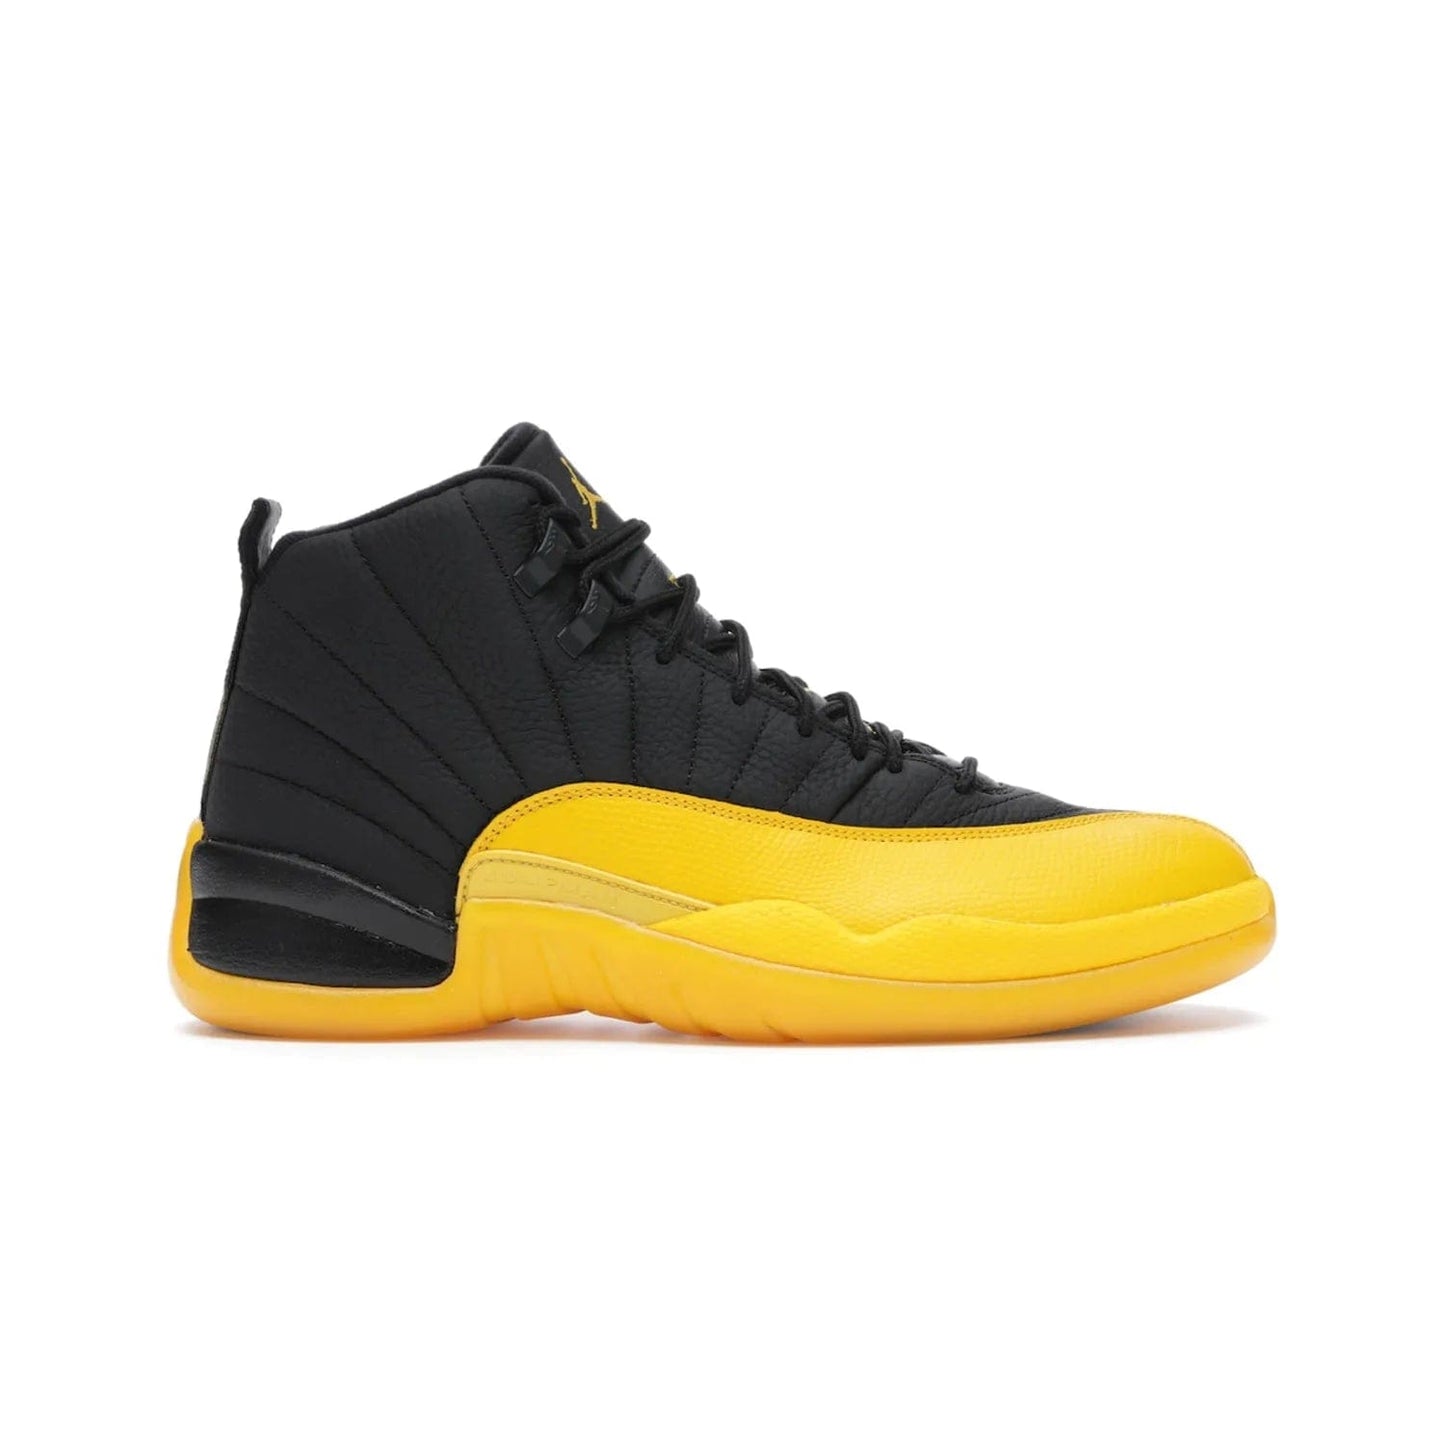 Jordan 12 Retro Black University Gold - Image 1 - Only at www.BallersClubKickz.com - This Jordan 12 Retro features a black tumbled leather upper and University Gold accents for a modern twist. Boasting Jordan "Two Three" branding and a yellow sole, these shoes will elevate your wardrobe. Fresh, sleek, and one of a kind - the Jordan 12 University Gold is your summer sneaker.